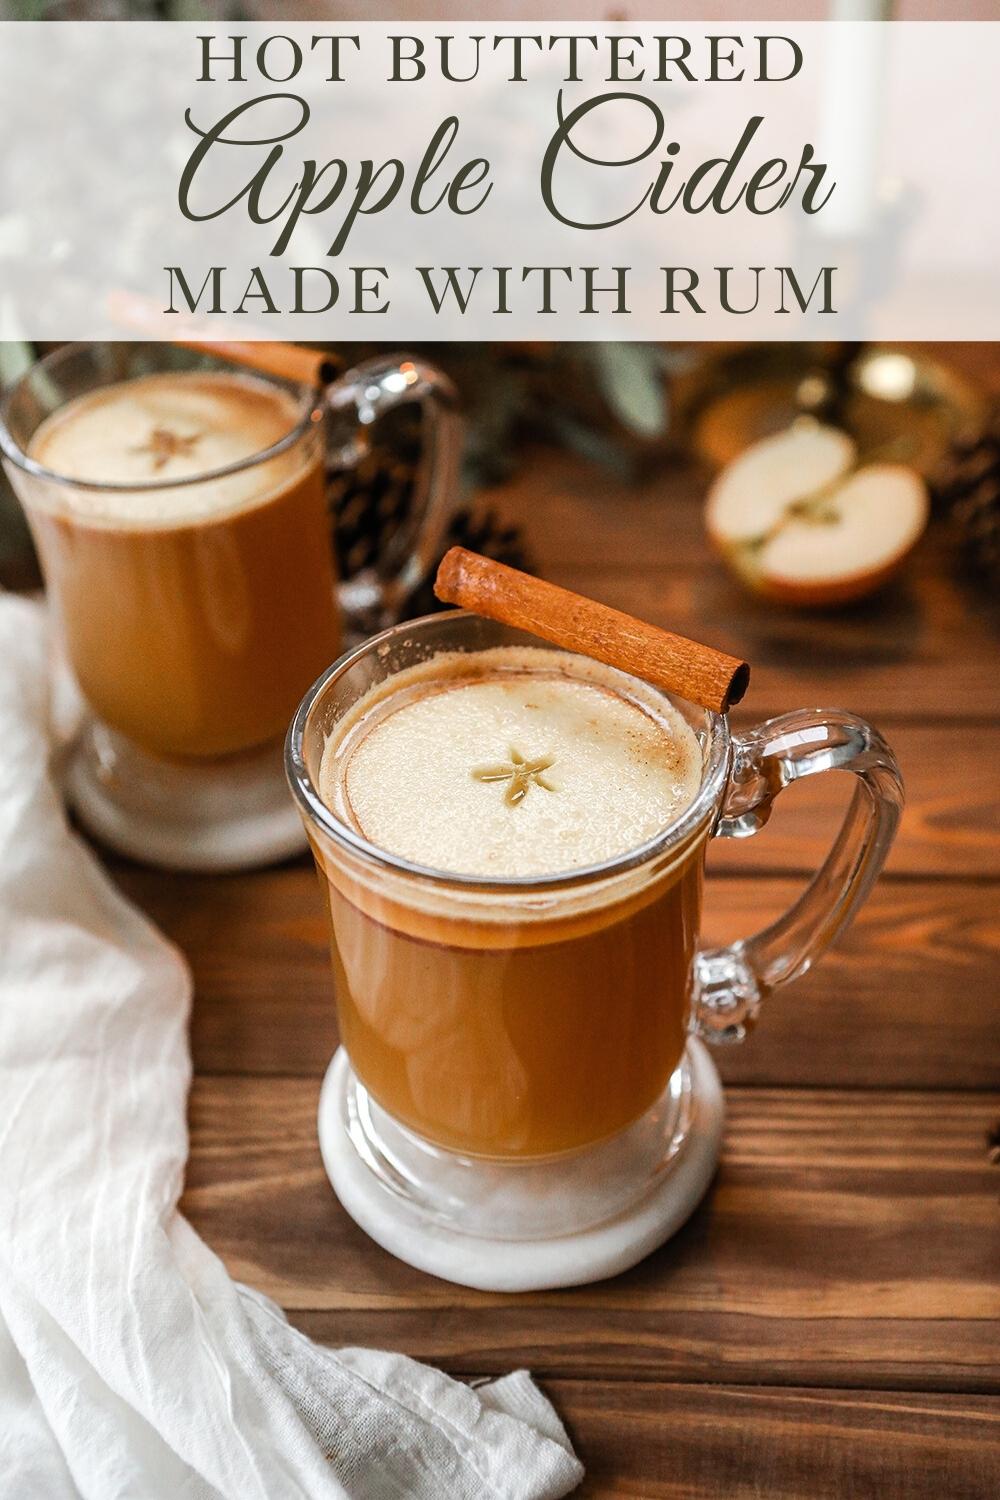 Hot buttered apple cider with rum